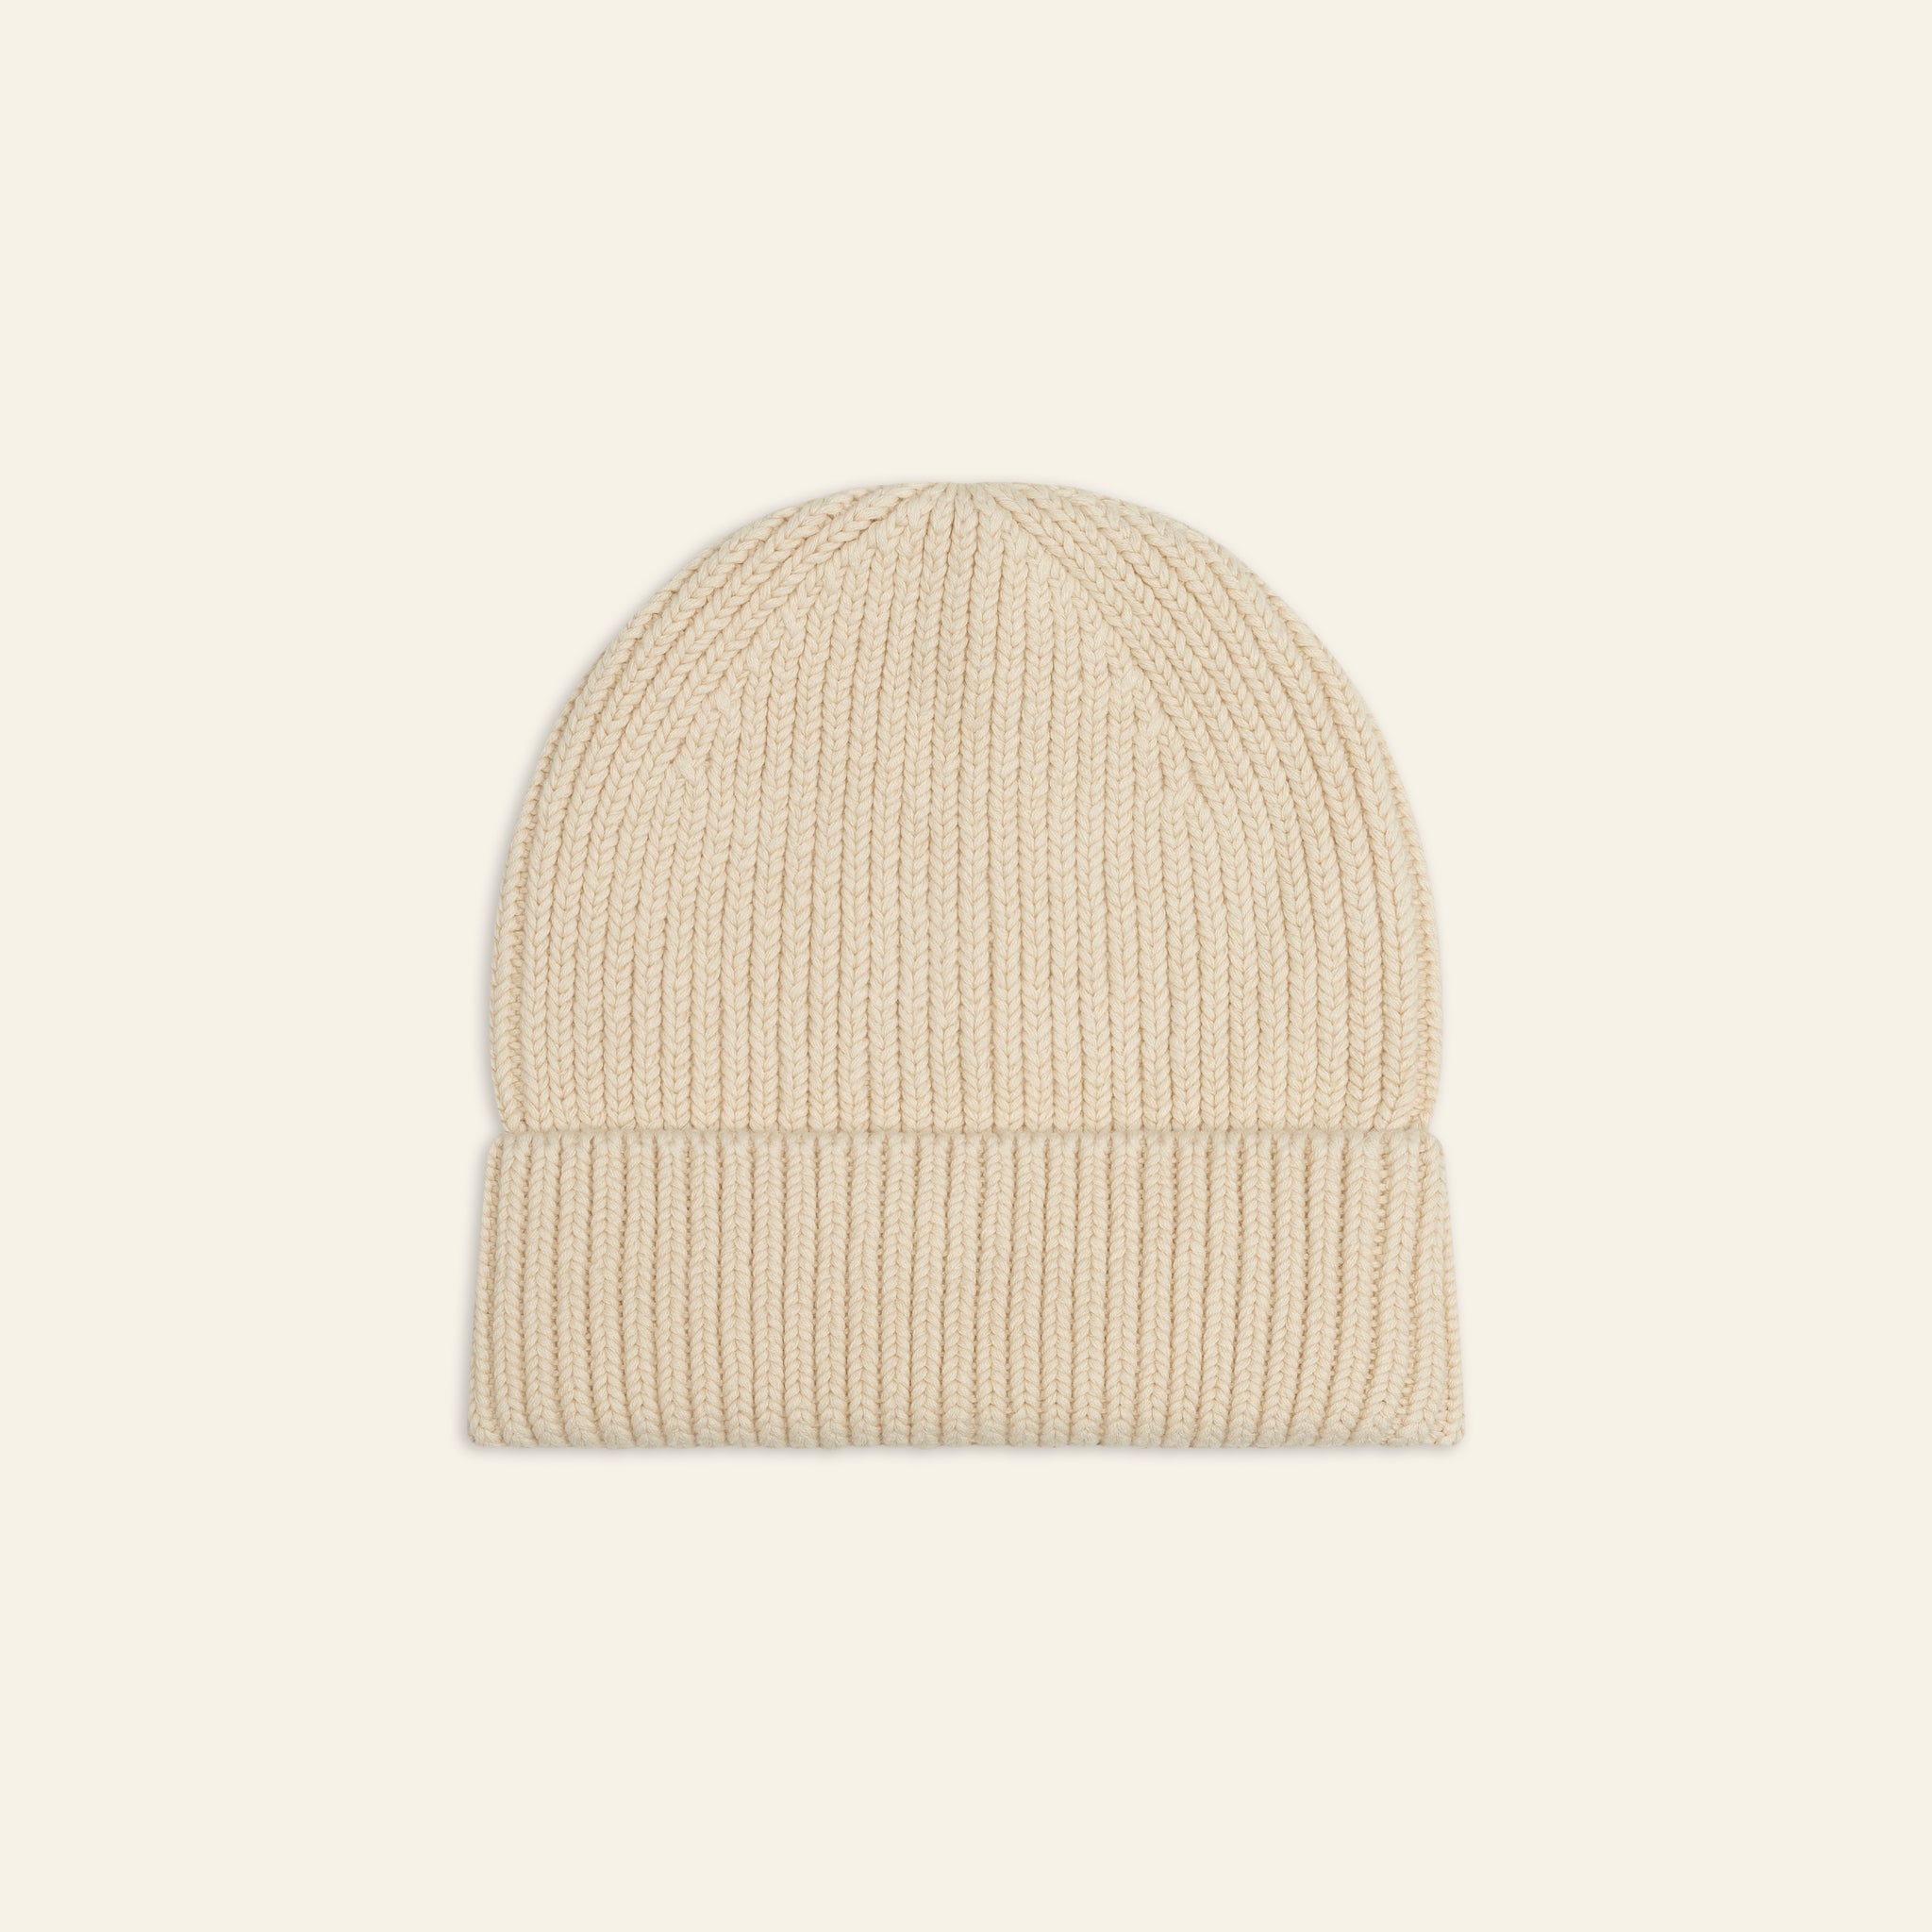 Illoura the Label Knit Beanie -  Biscuit